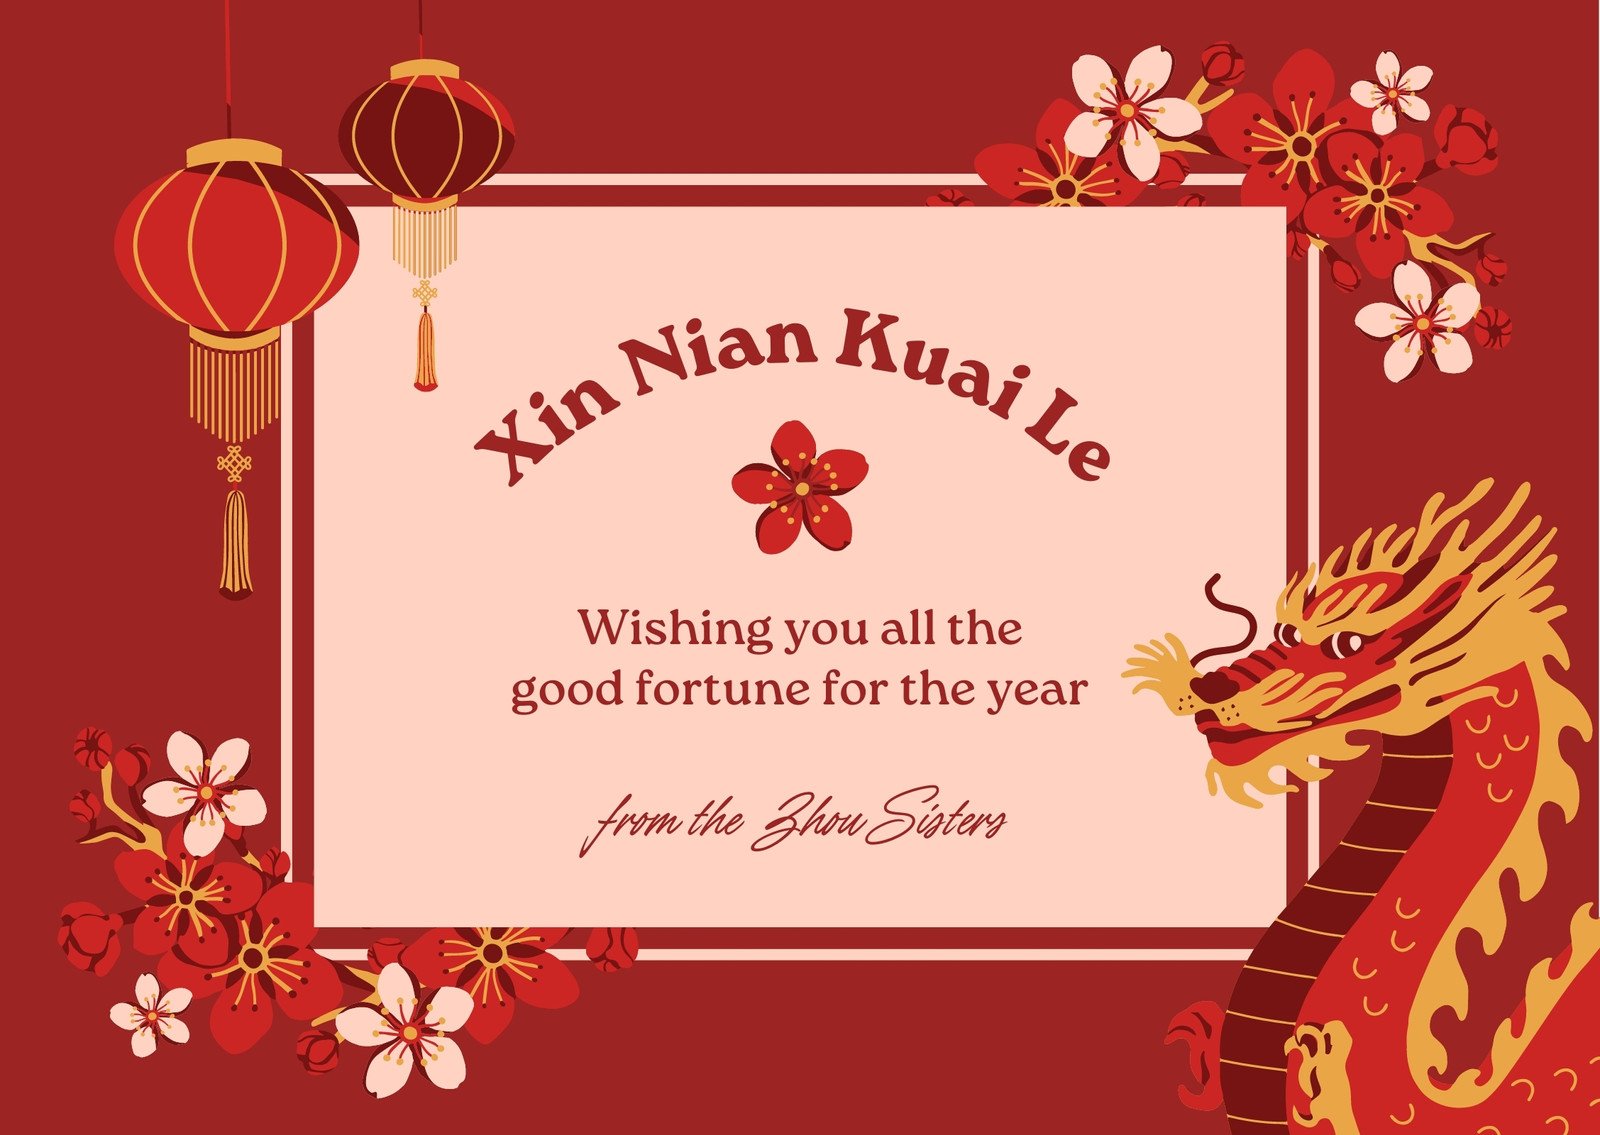 Lunar New Year 2023 Images & HD Wallpapers for Free Download Online: Wish  Happy Chinese New Year With WhatsApp Messages, GIFs and Greetings to Loved  Ones